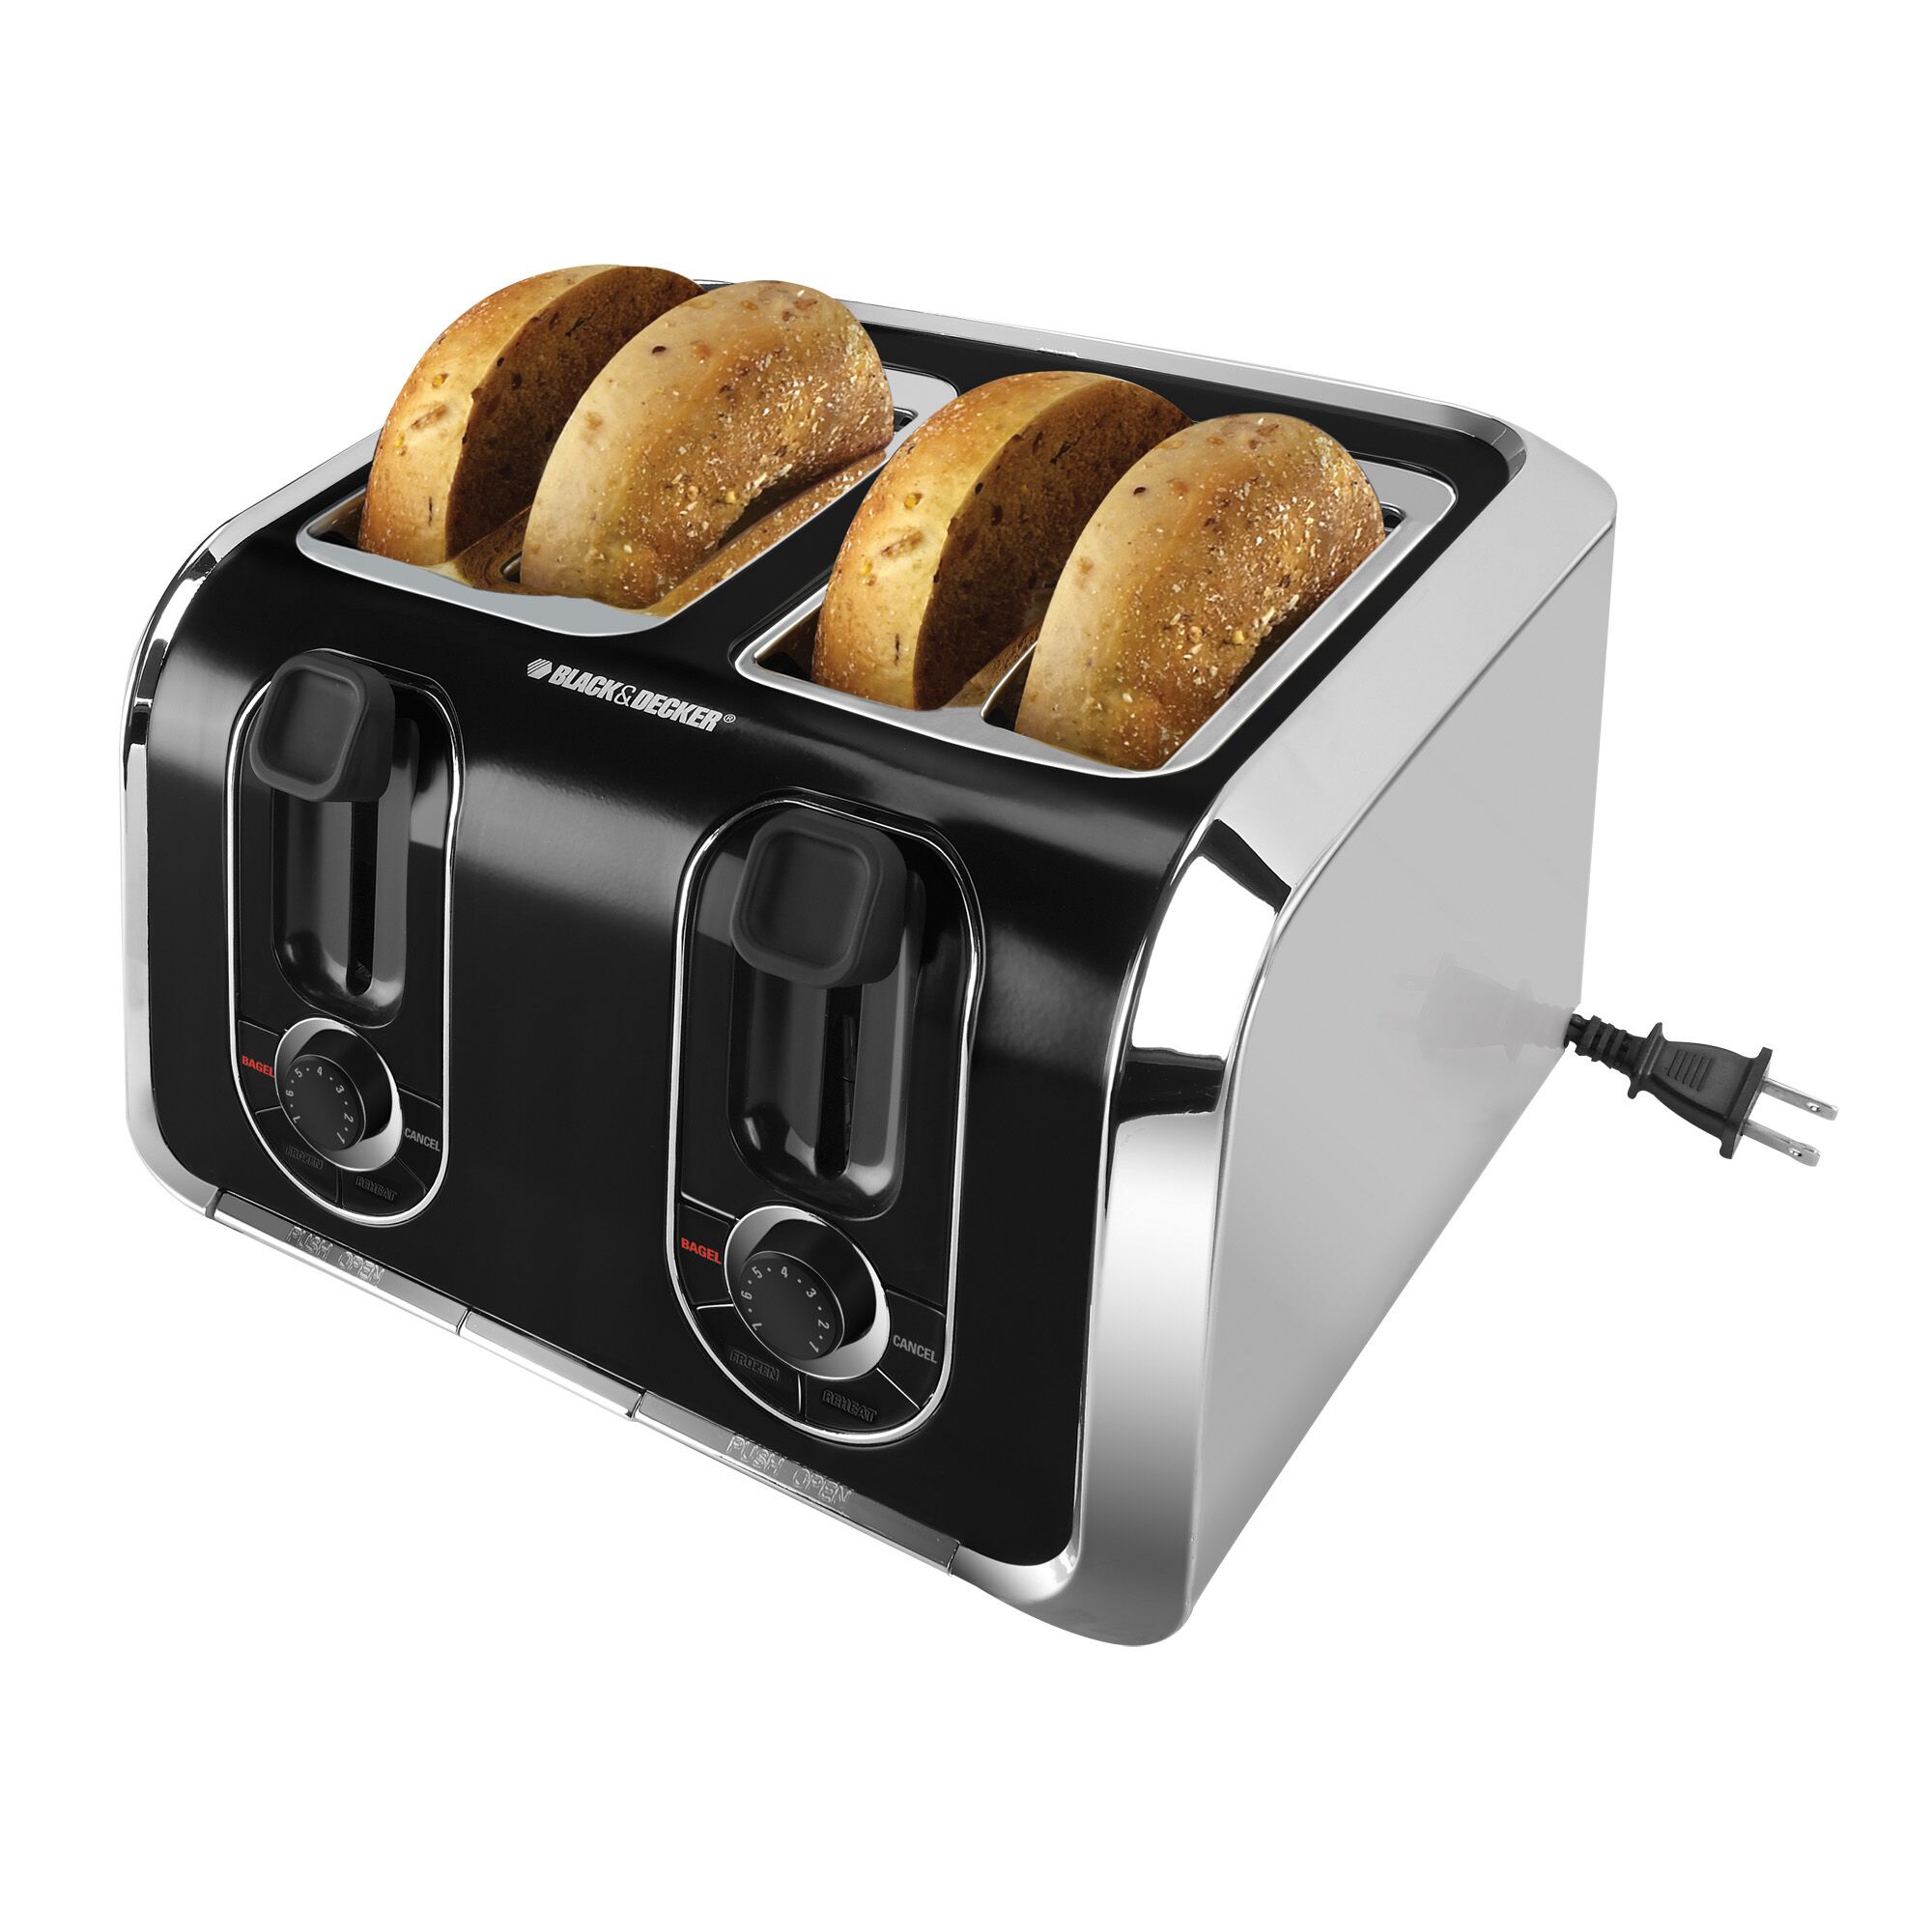 4 slice toaster with bagels.